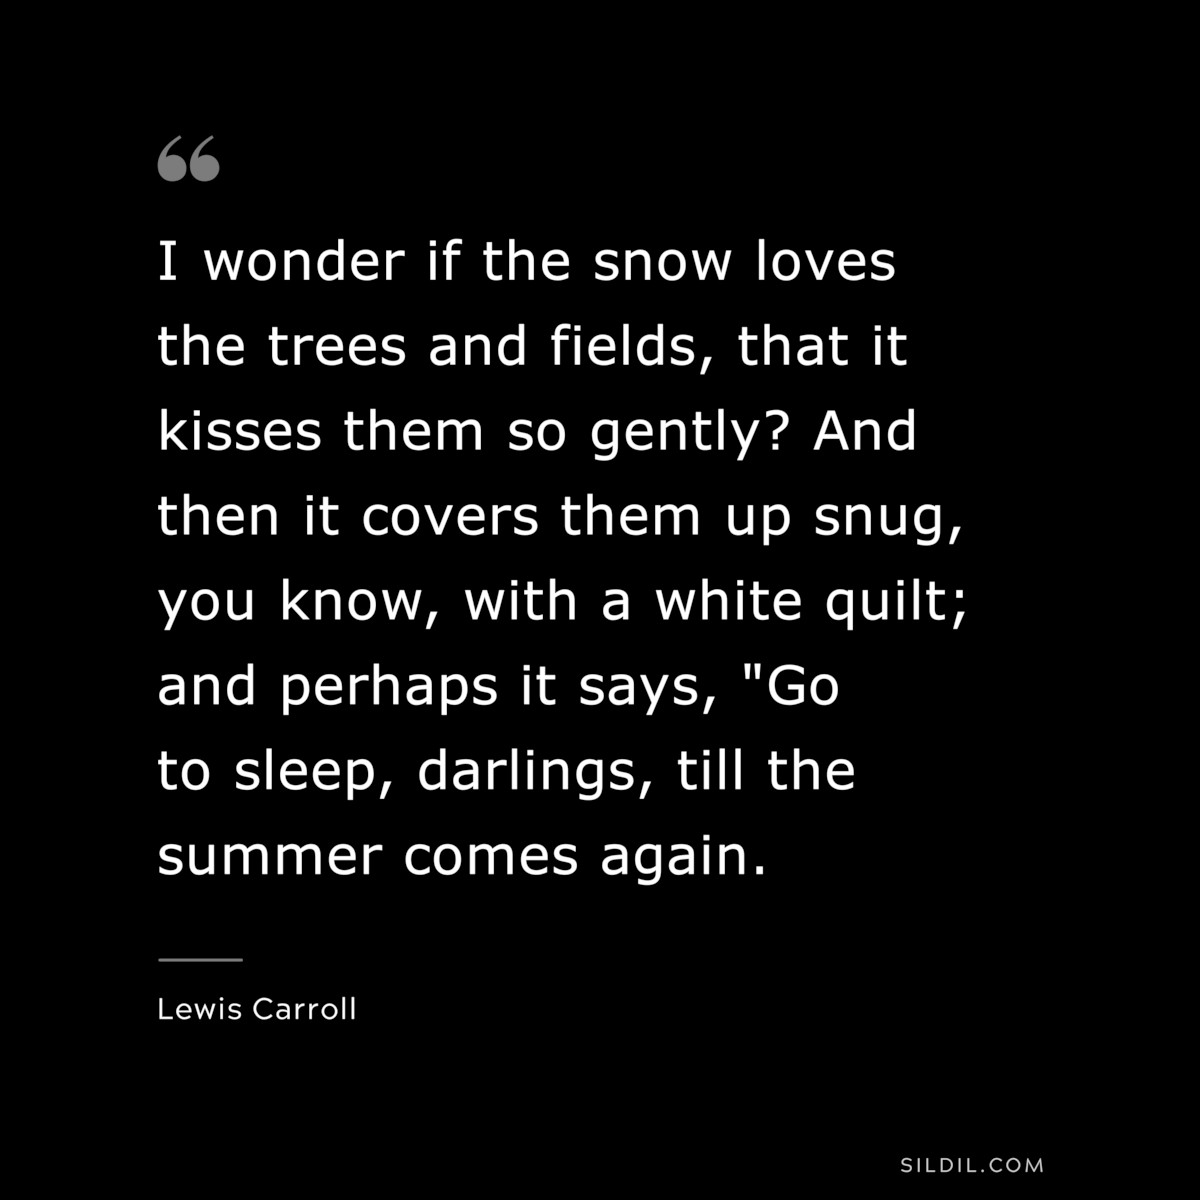 I wonder if the snow loves the trees and fields, that it kisses them so gently? And then it covers them up snug, you know, with a white quilt; and perhaps it says, "Go to sleep, darlings, till the summer comes again.